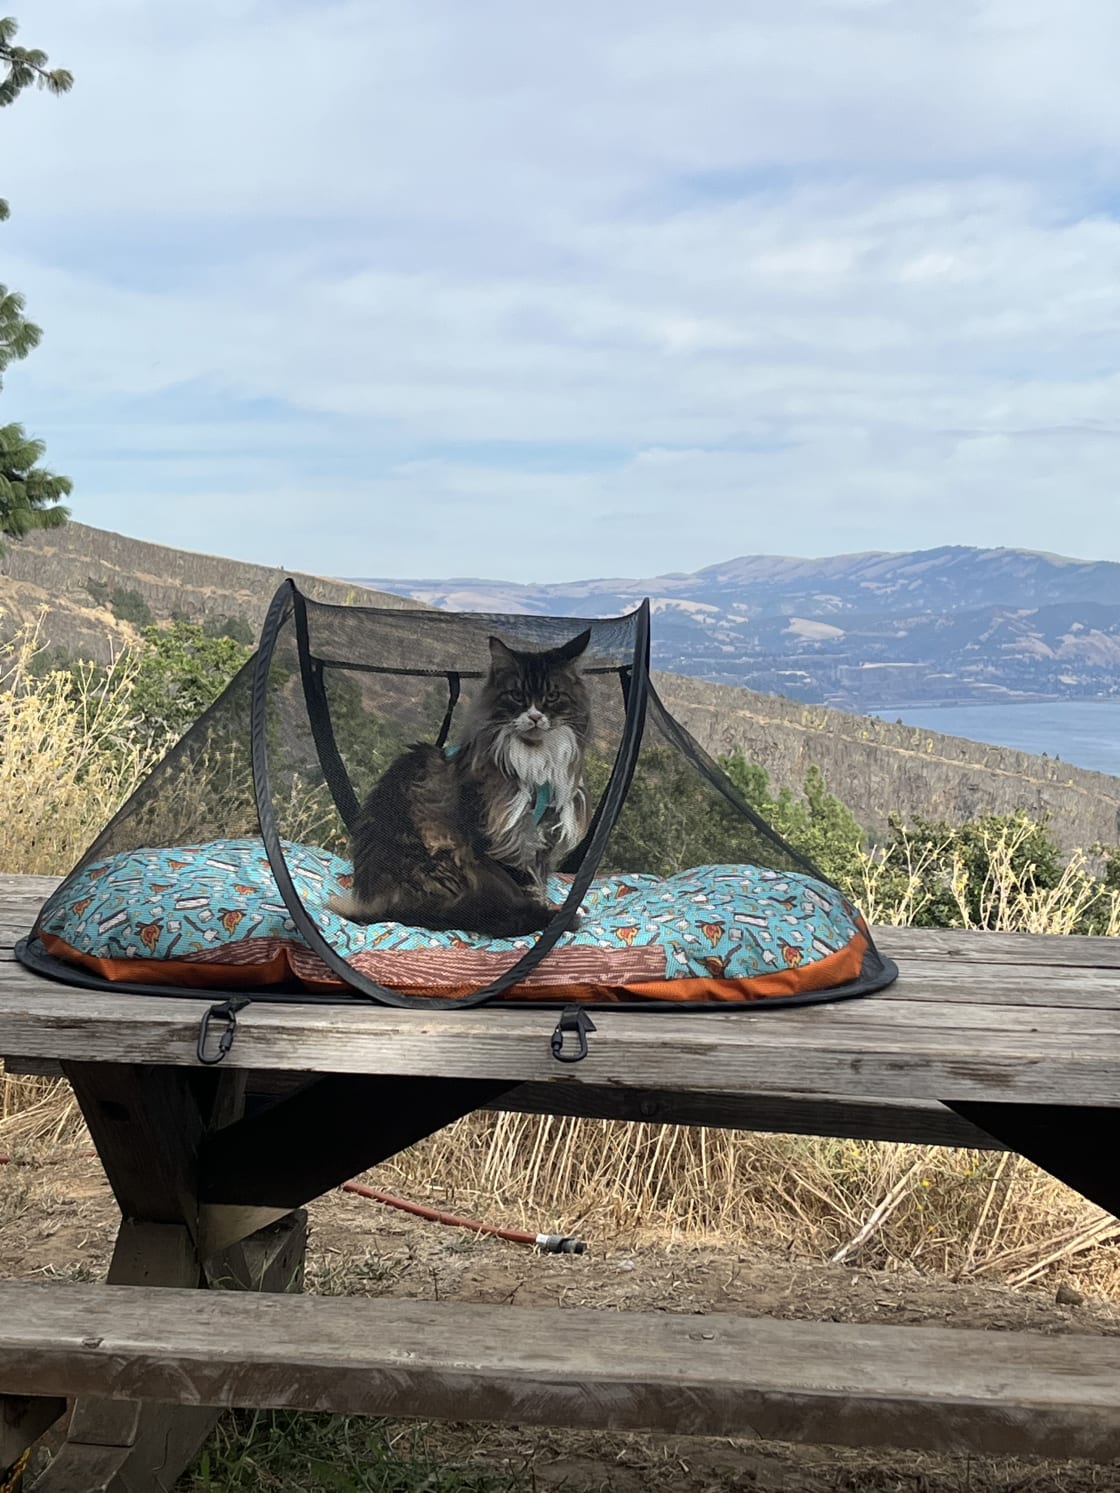 Twig enjoying the great outdoors on her first camping trip!